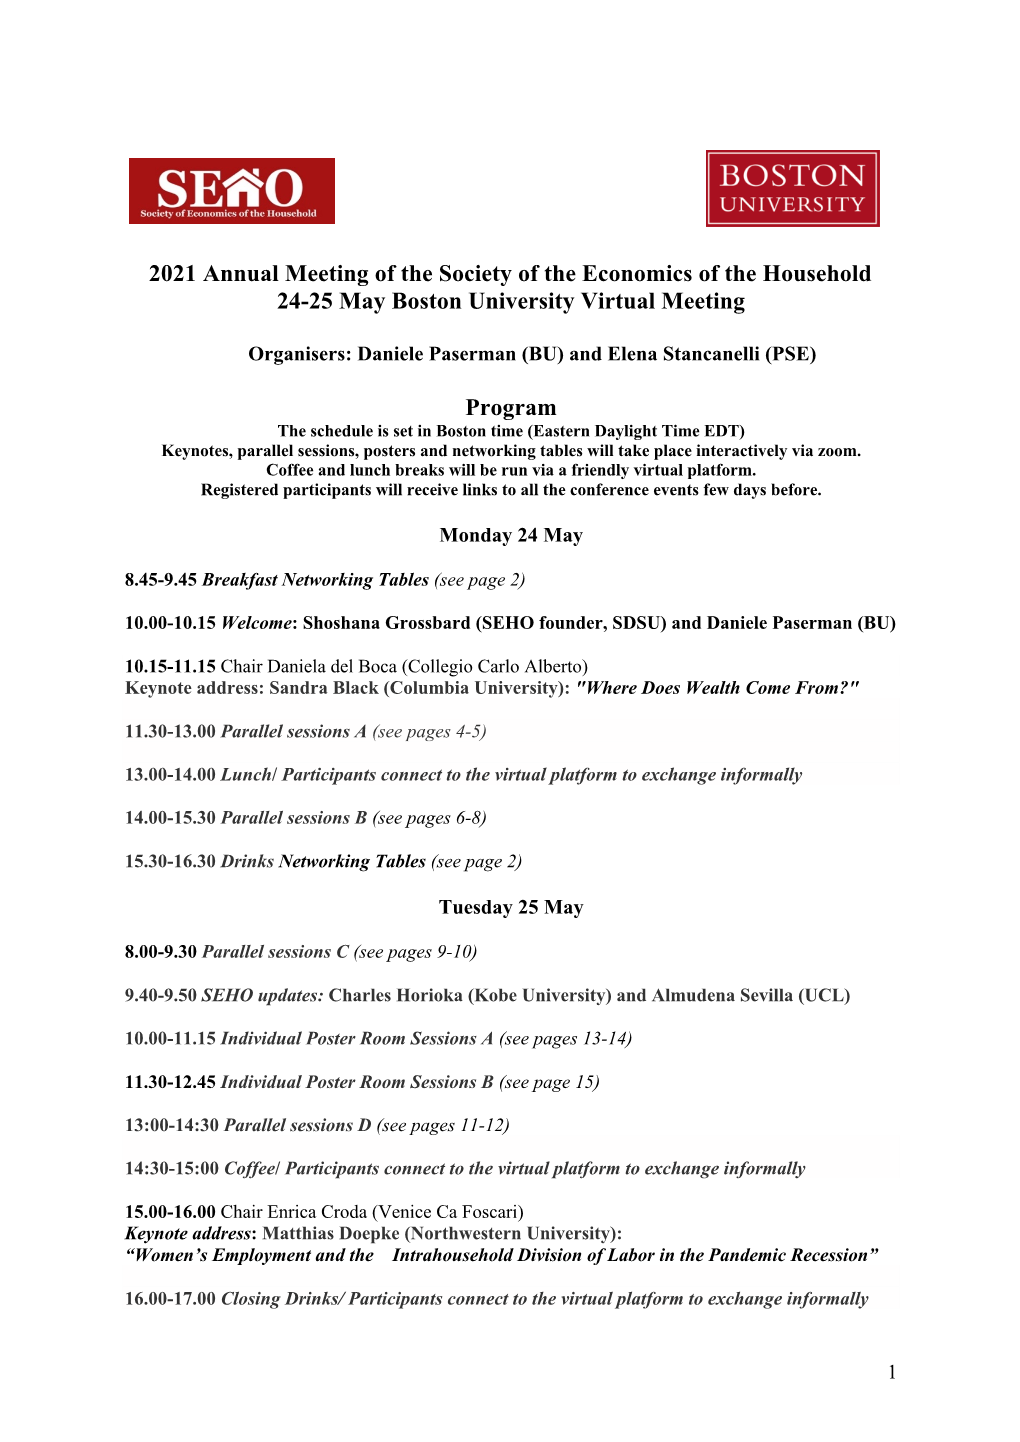 2021 Annual Meeting of the Society of the Economics of the Household 24-25 May Boston University Virtual Meeting